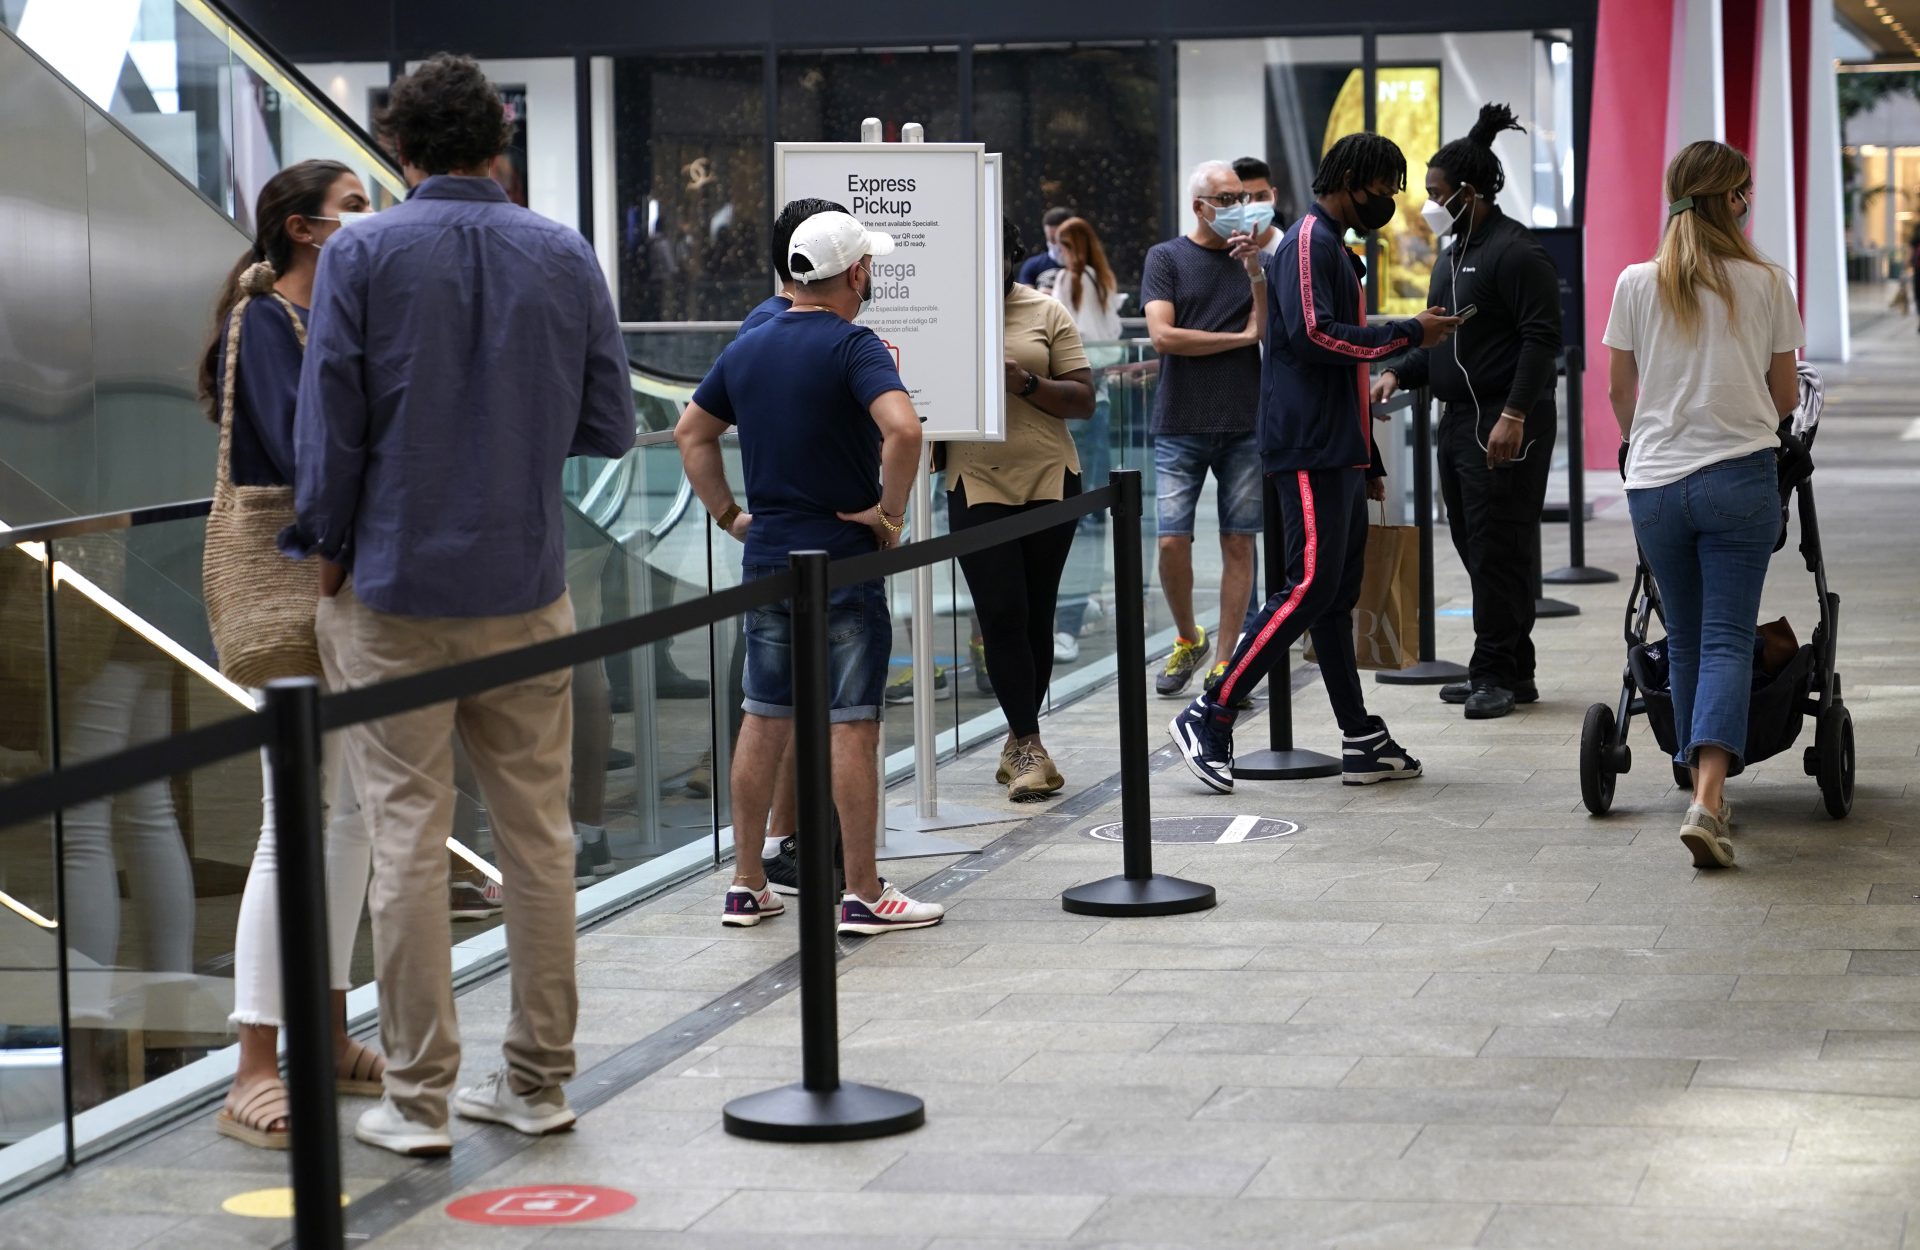 Customers wait in line at Express Pickup outside of an Apple store at Brickell City Centre, Friday, Nov. 6, 2020, in Miami. After months of slumping sales and businesses toppling into bankruptcy, Black Friday is offering a small beacon of hope. In normal times, Black Friday is the busiest shopping day of the year, drawing millions of shoppers eager to get started on their holiday spending. But these are not normal times.